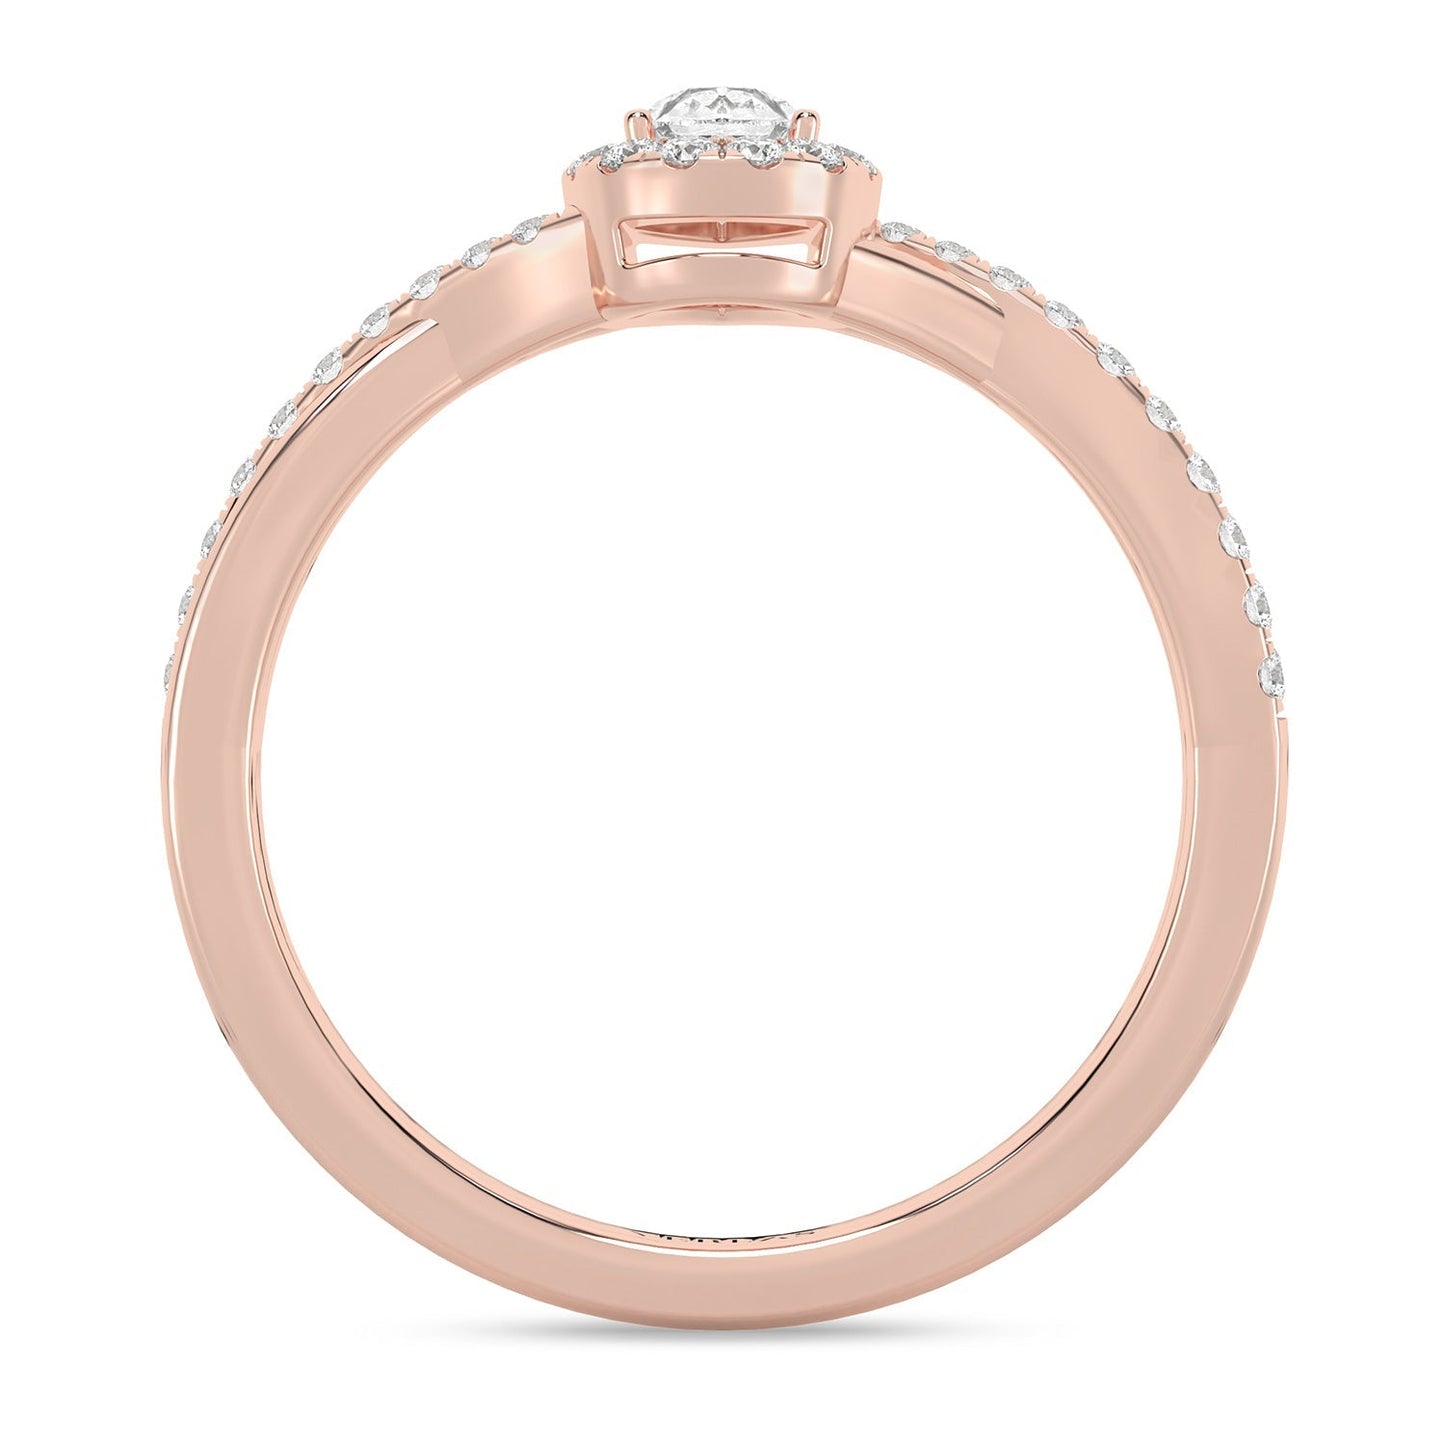 Essential 4-Pronged Round Ring_Product Angle_1/3 Ct. - 3